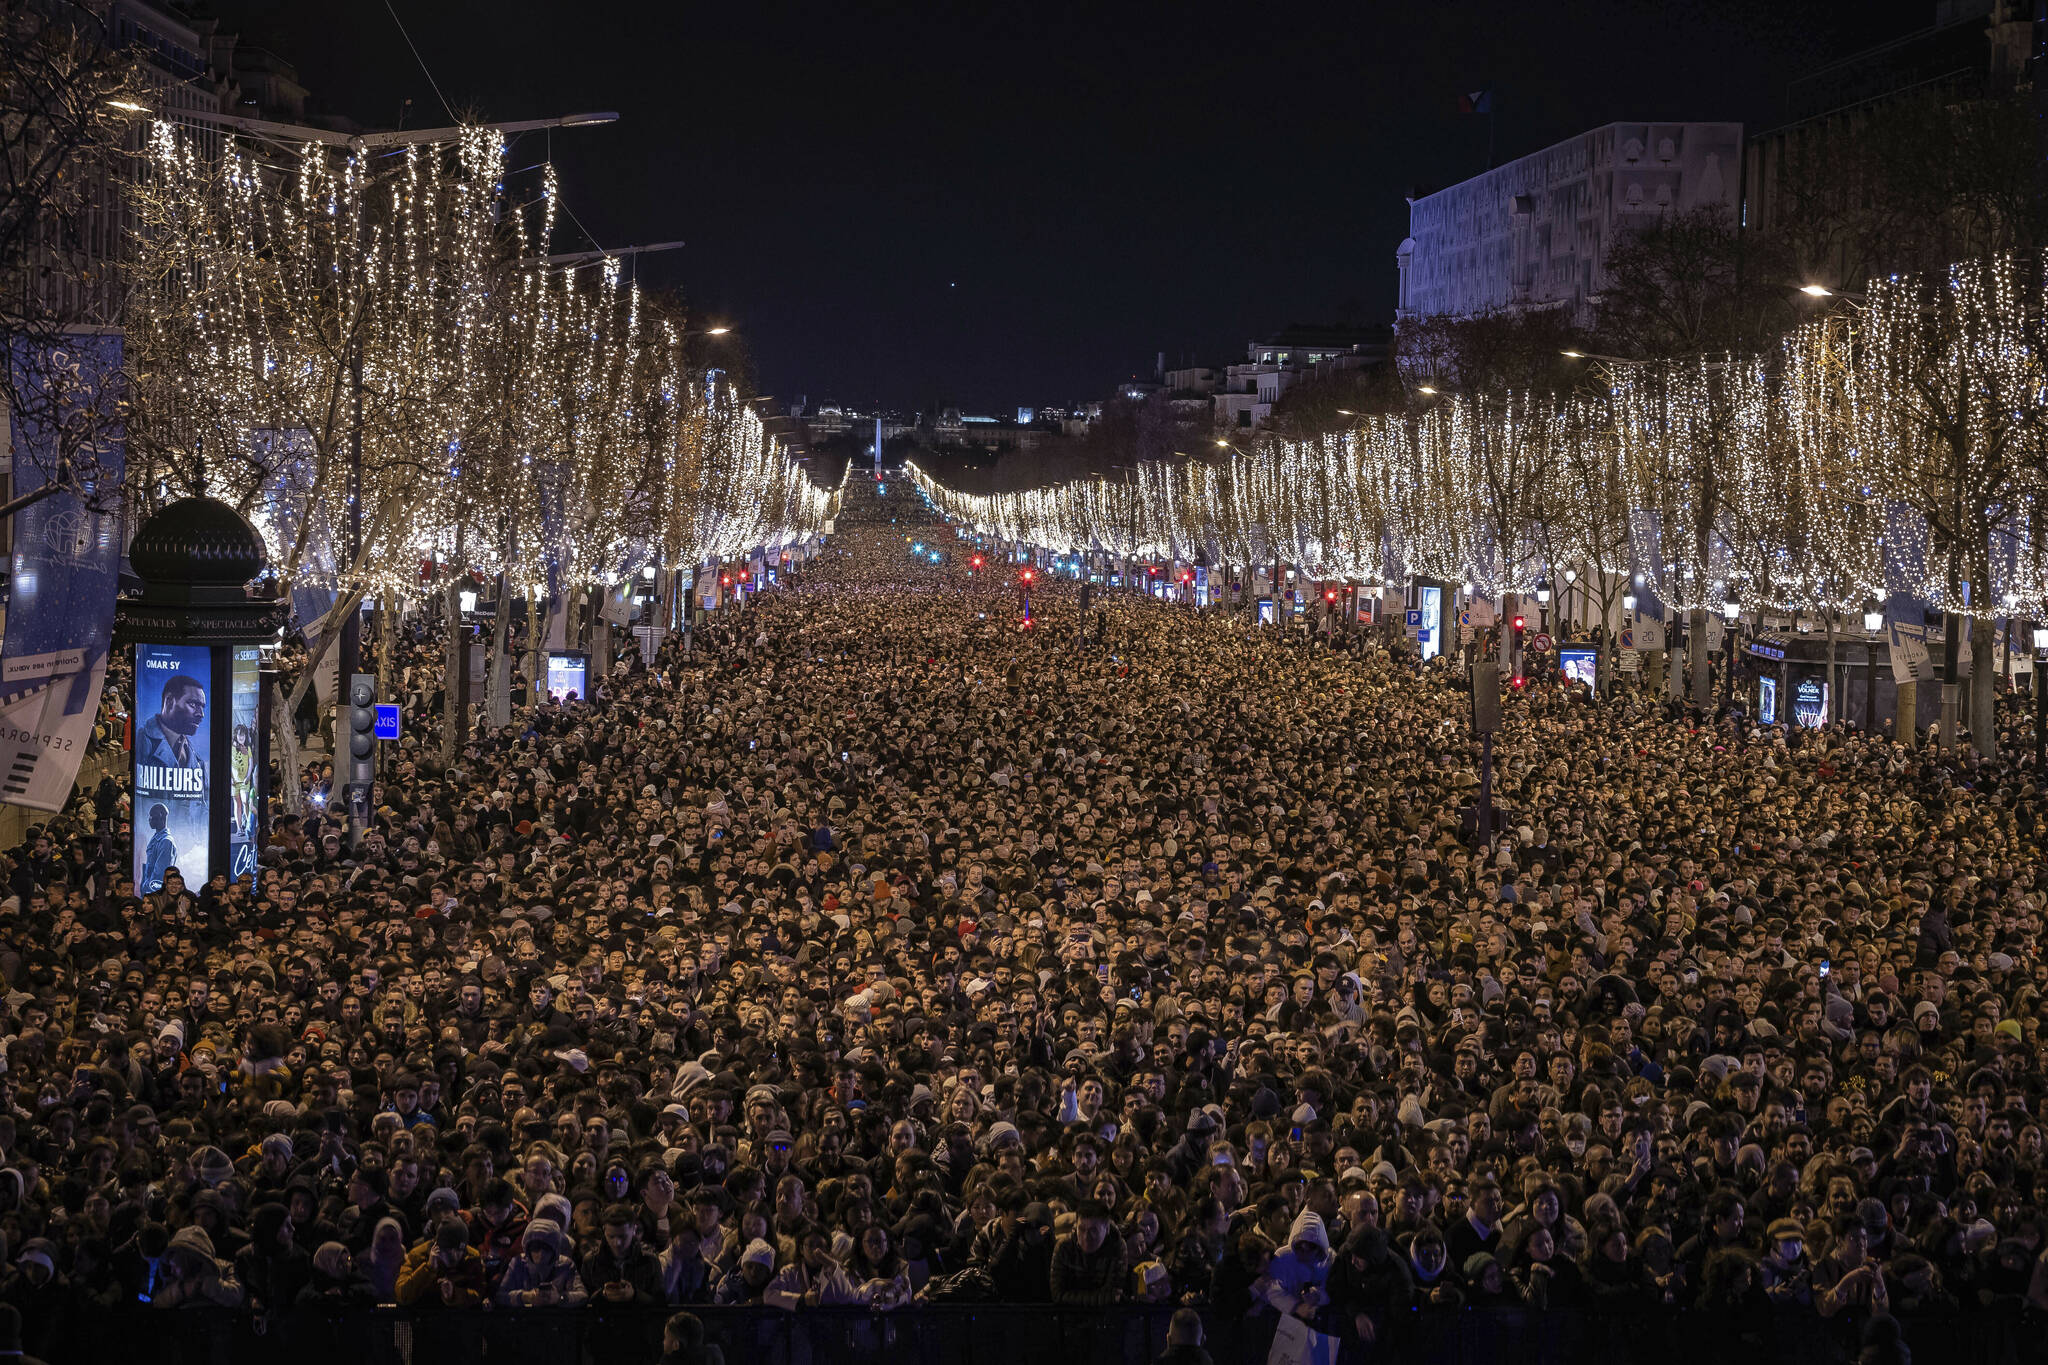 Revelers watch a sound and light show projected on the Arc de Triomphe as they celebrate the New Year on the Champs Elysees, in Paris, France, Saturday, Dec. 31, 2022. (AP Photo/Aurelien Morissard)